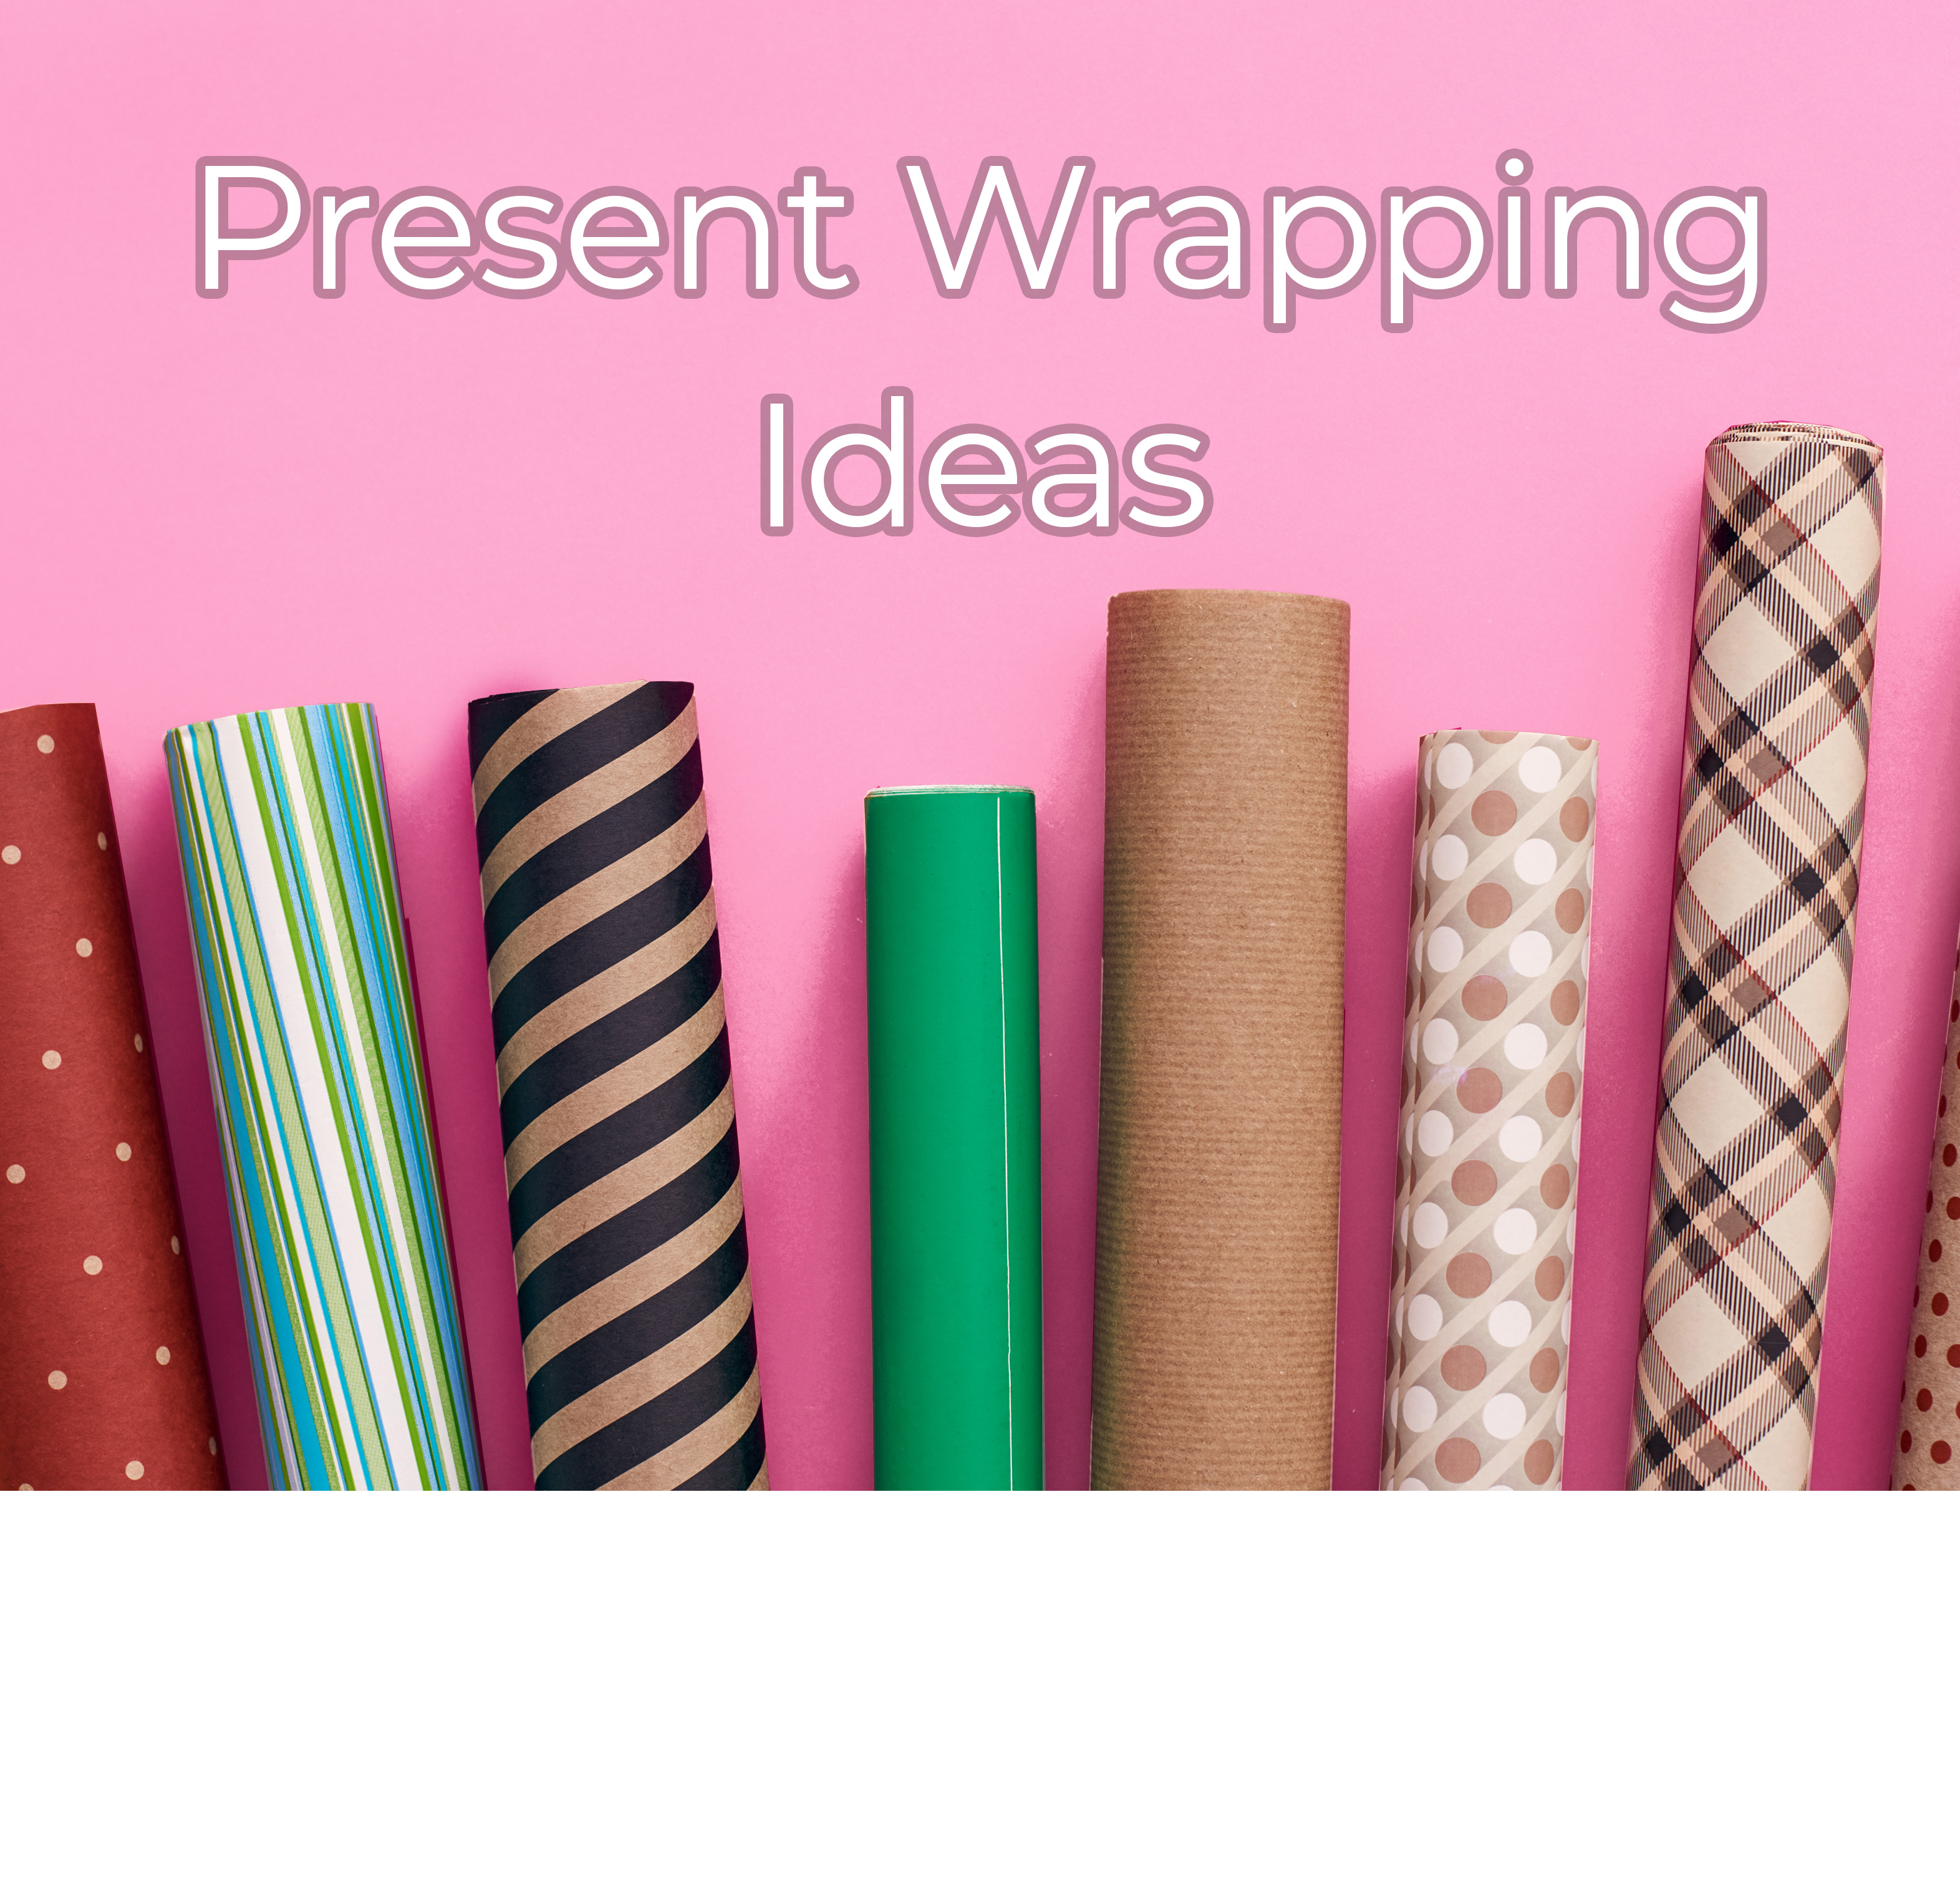 Present Wrapping Ideas